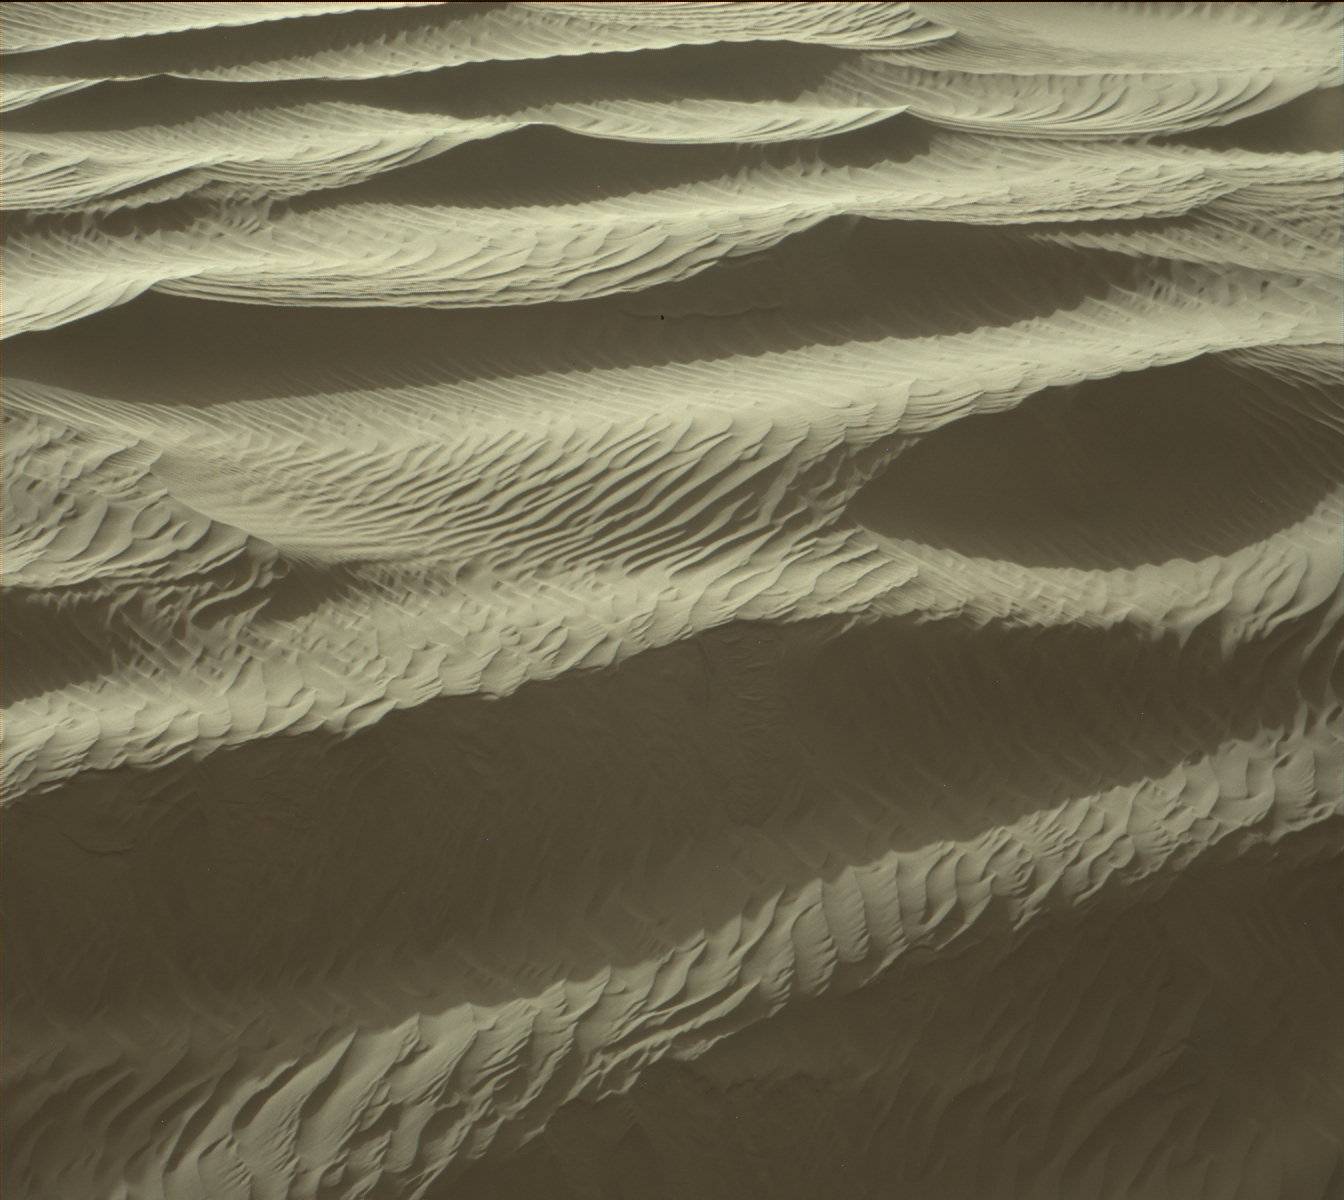 Mastcam view of finely-sculpted sand ripples on High Dune. Image Credit: NASA/JPL-Caltech